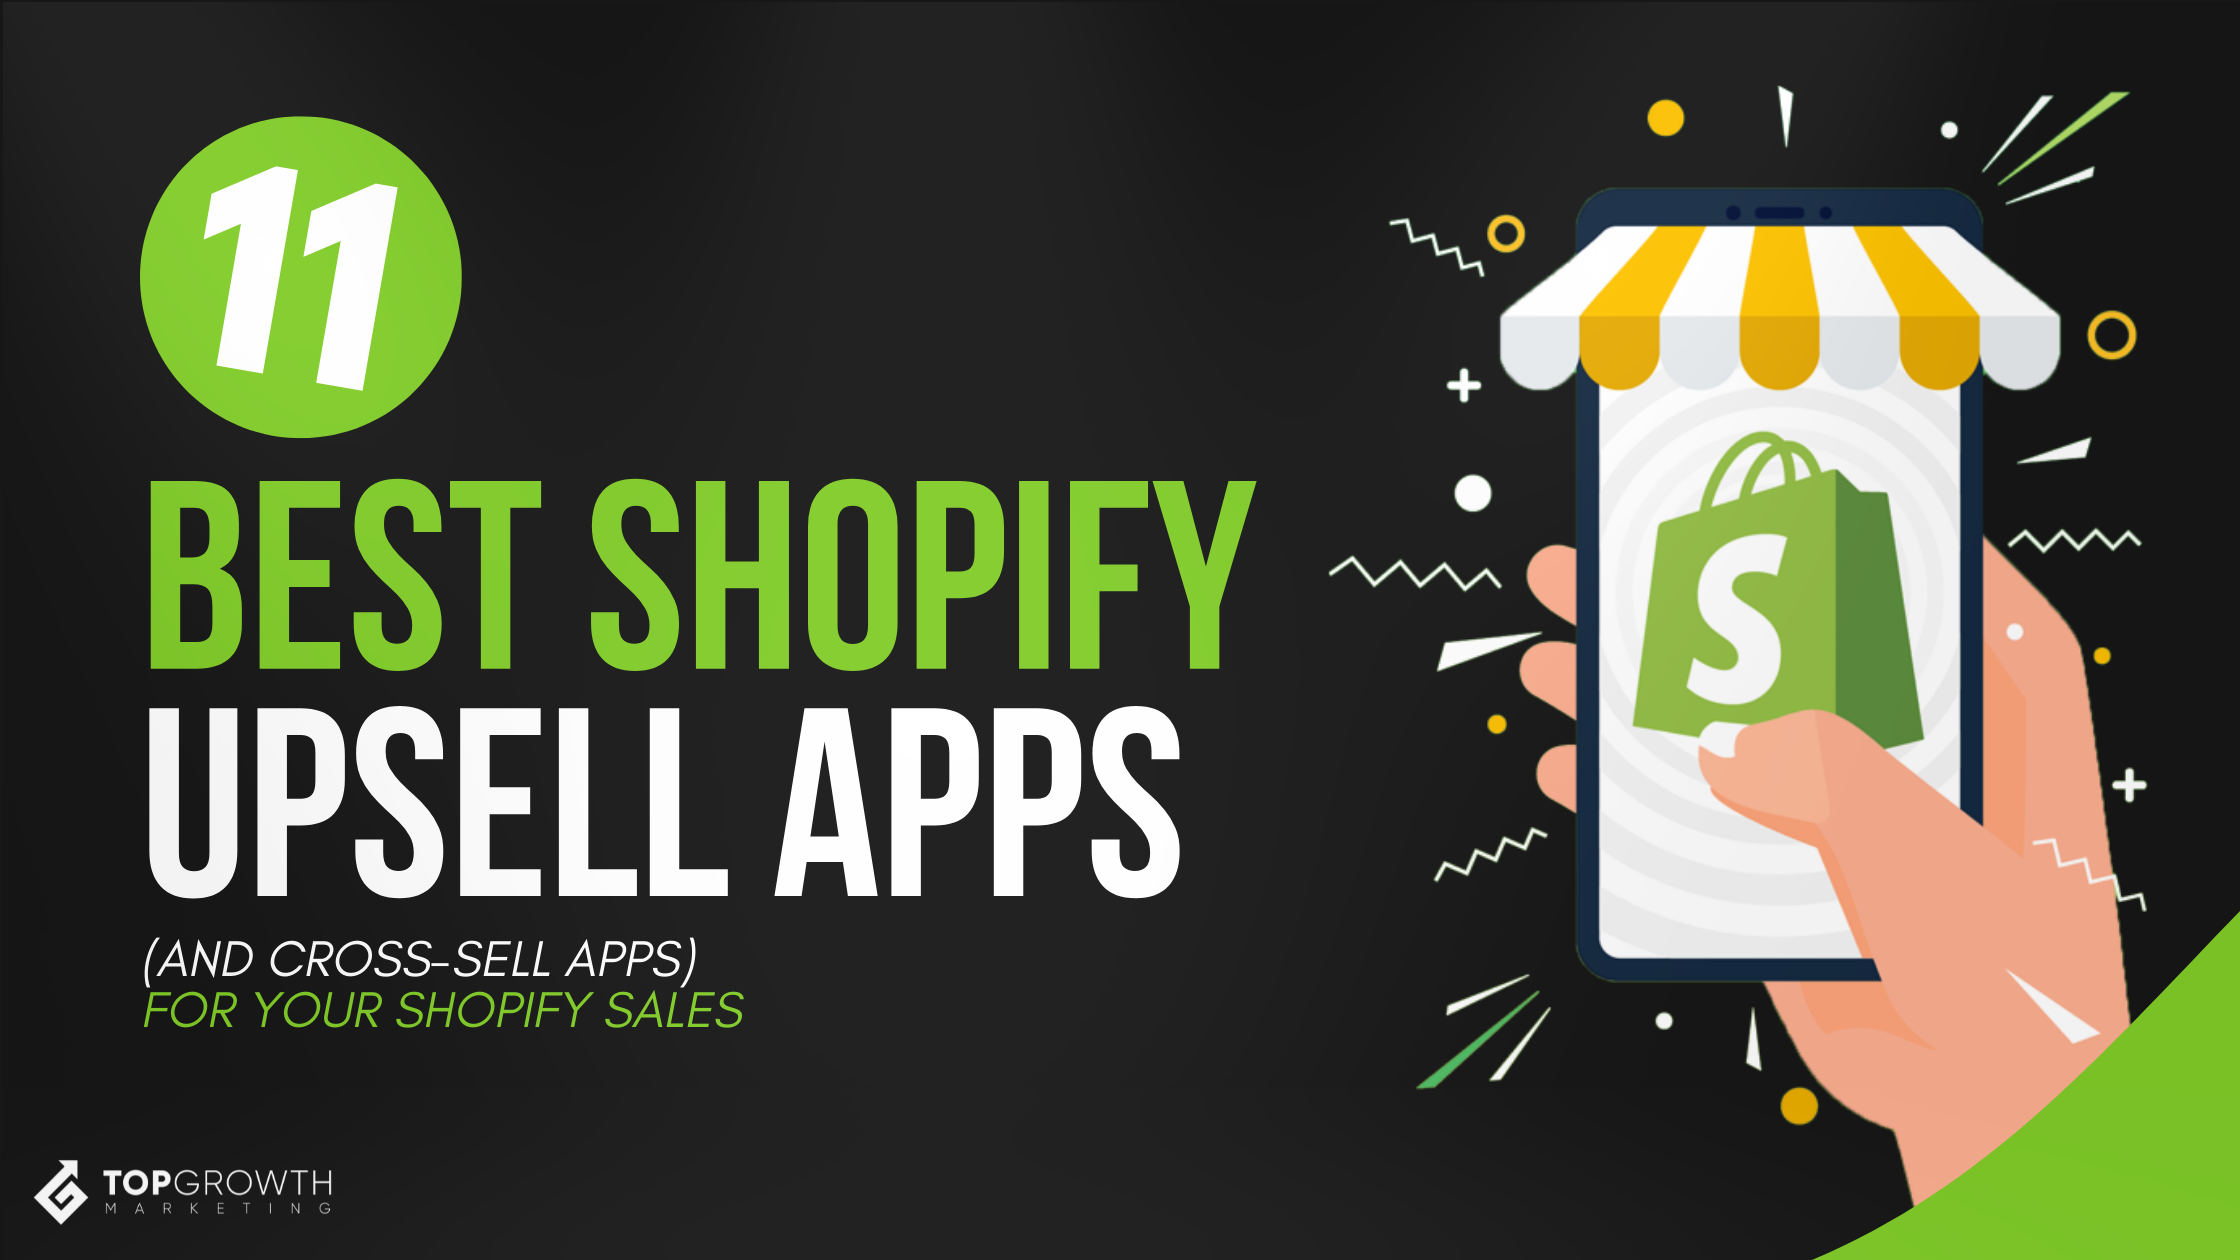 11 Best Shopify Upsell Apps and Cross-sell Apps to Increase Your Sales